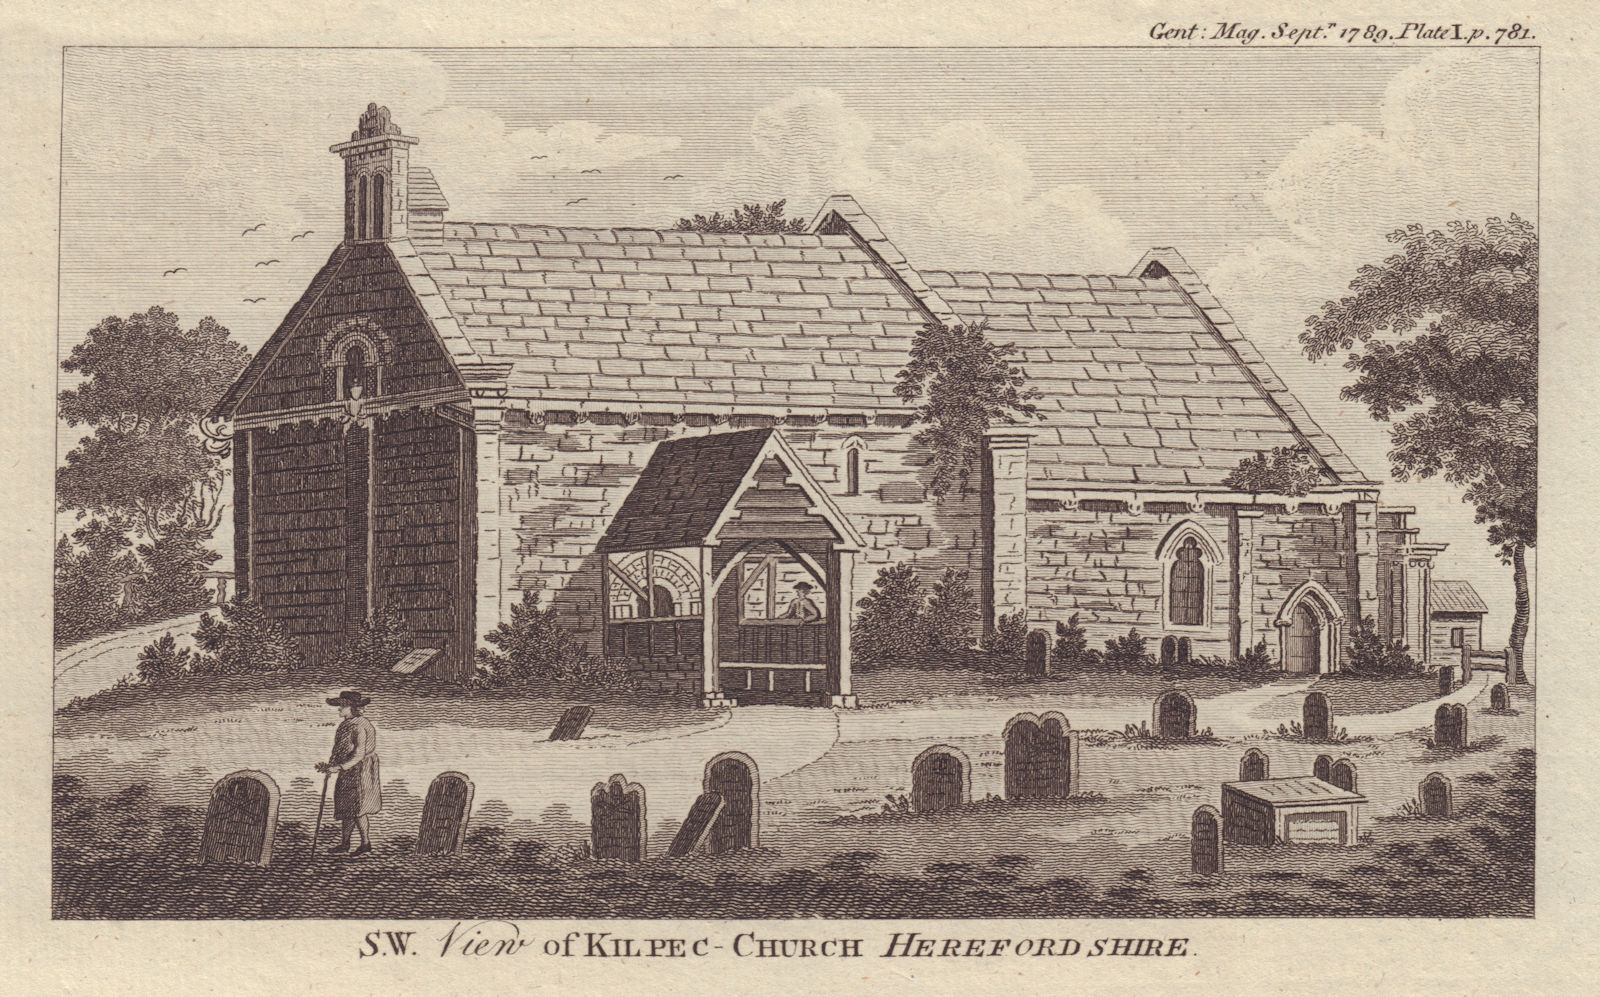 The Church of St Mary and St David, Kilpeck, Herefordshire. GENTS MAG 1789